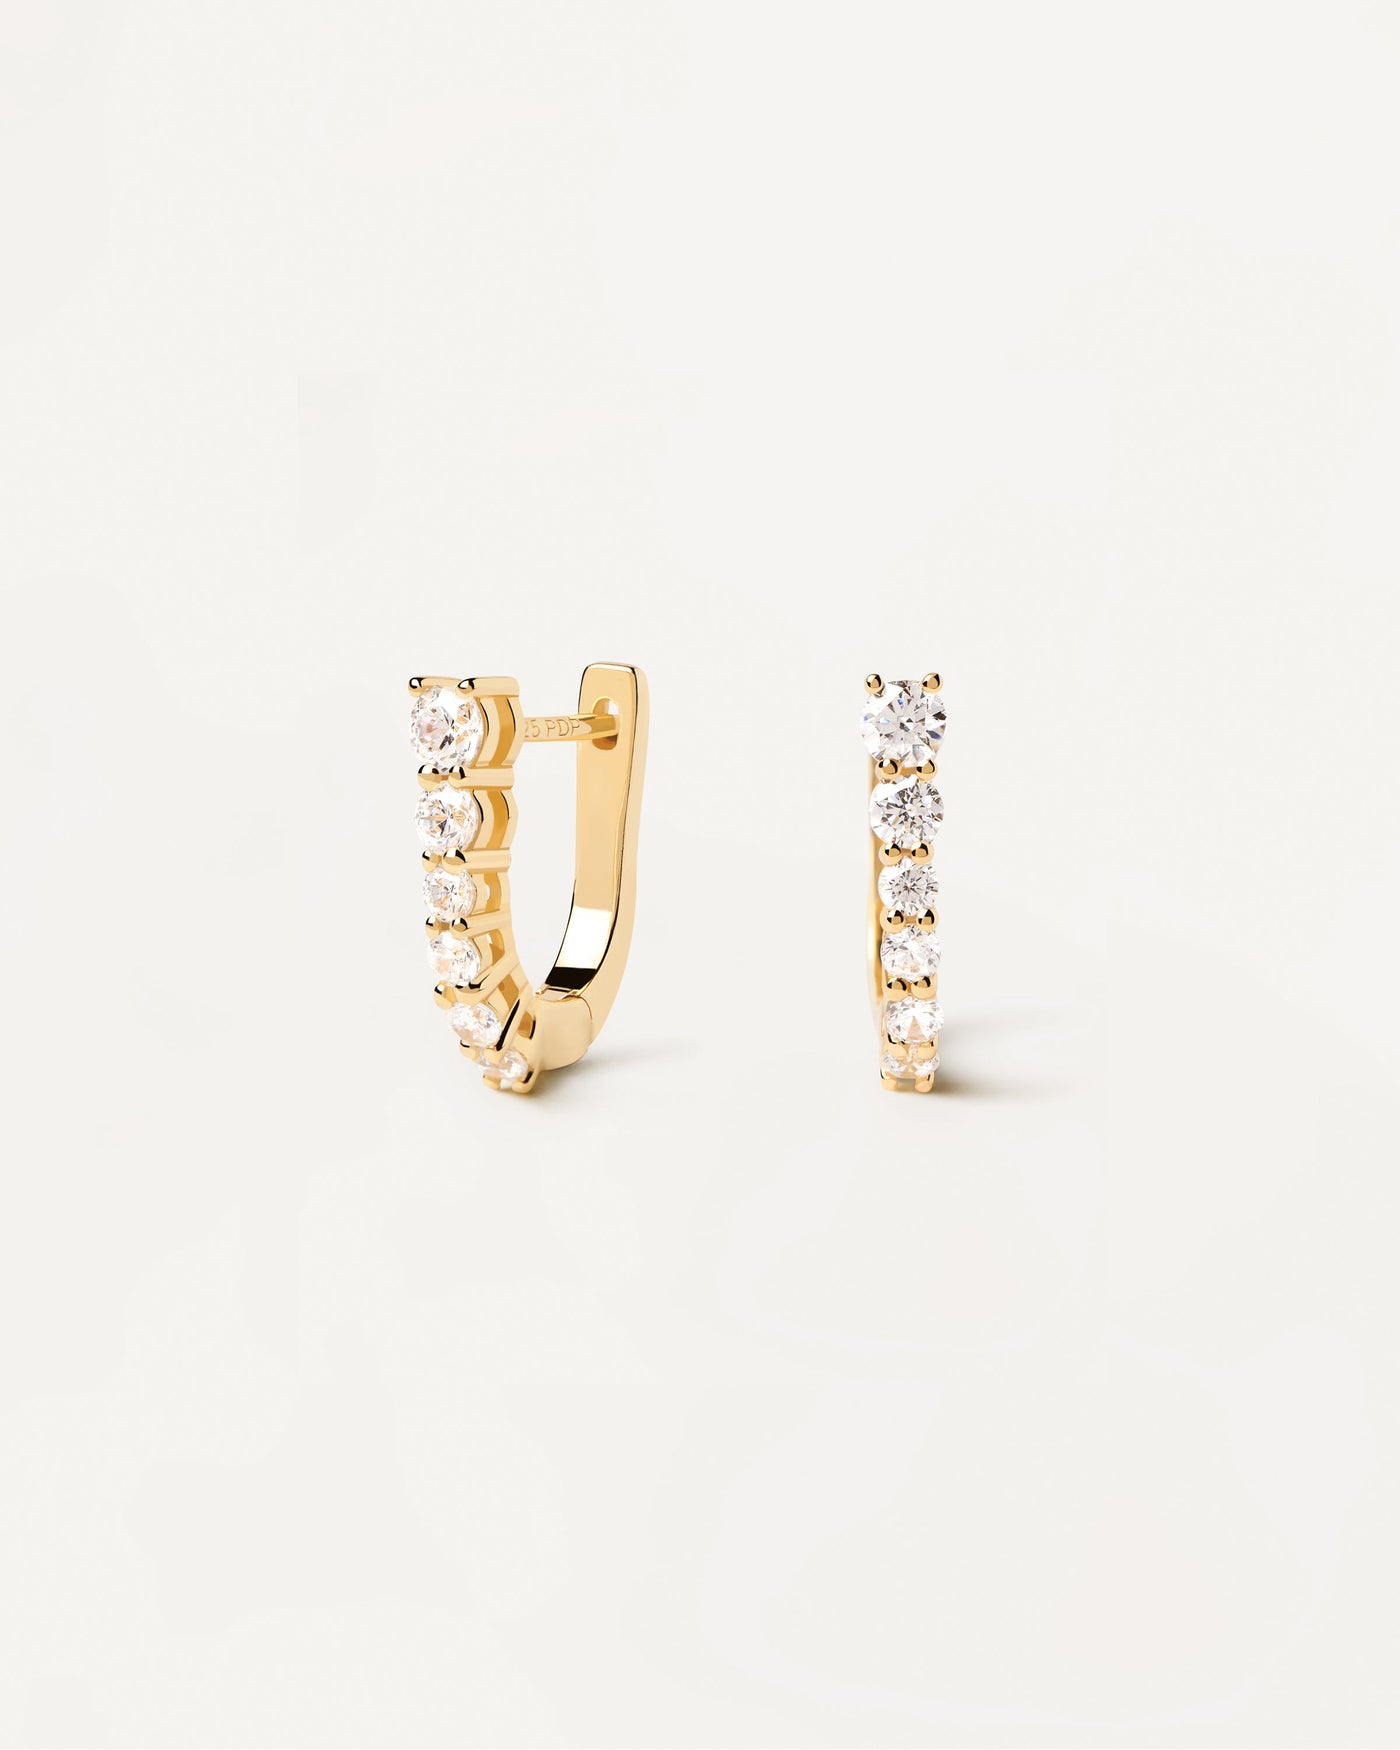 2023 Selection | Rise Earrings. Dainty hoops in gold-plated silver with white zirconia. Get the latest arrival from PDPAOLA. Place your order safely and get this Best Seller. Free Shipping.